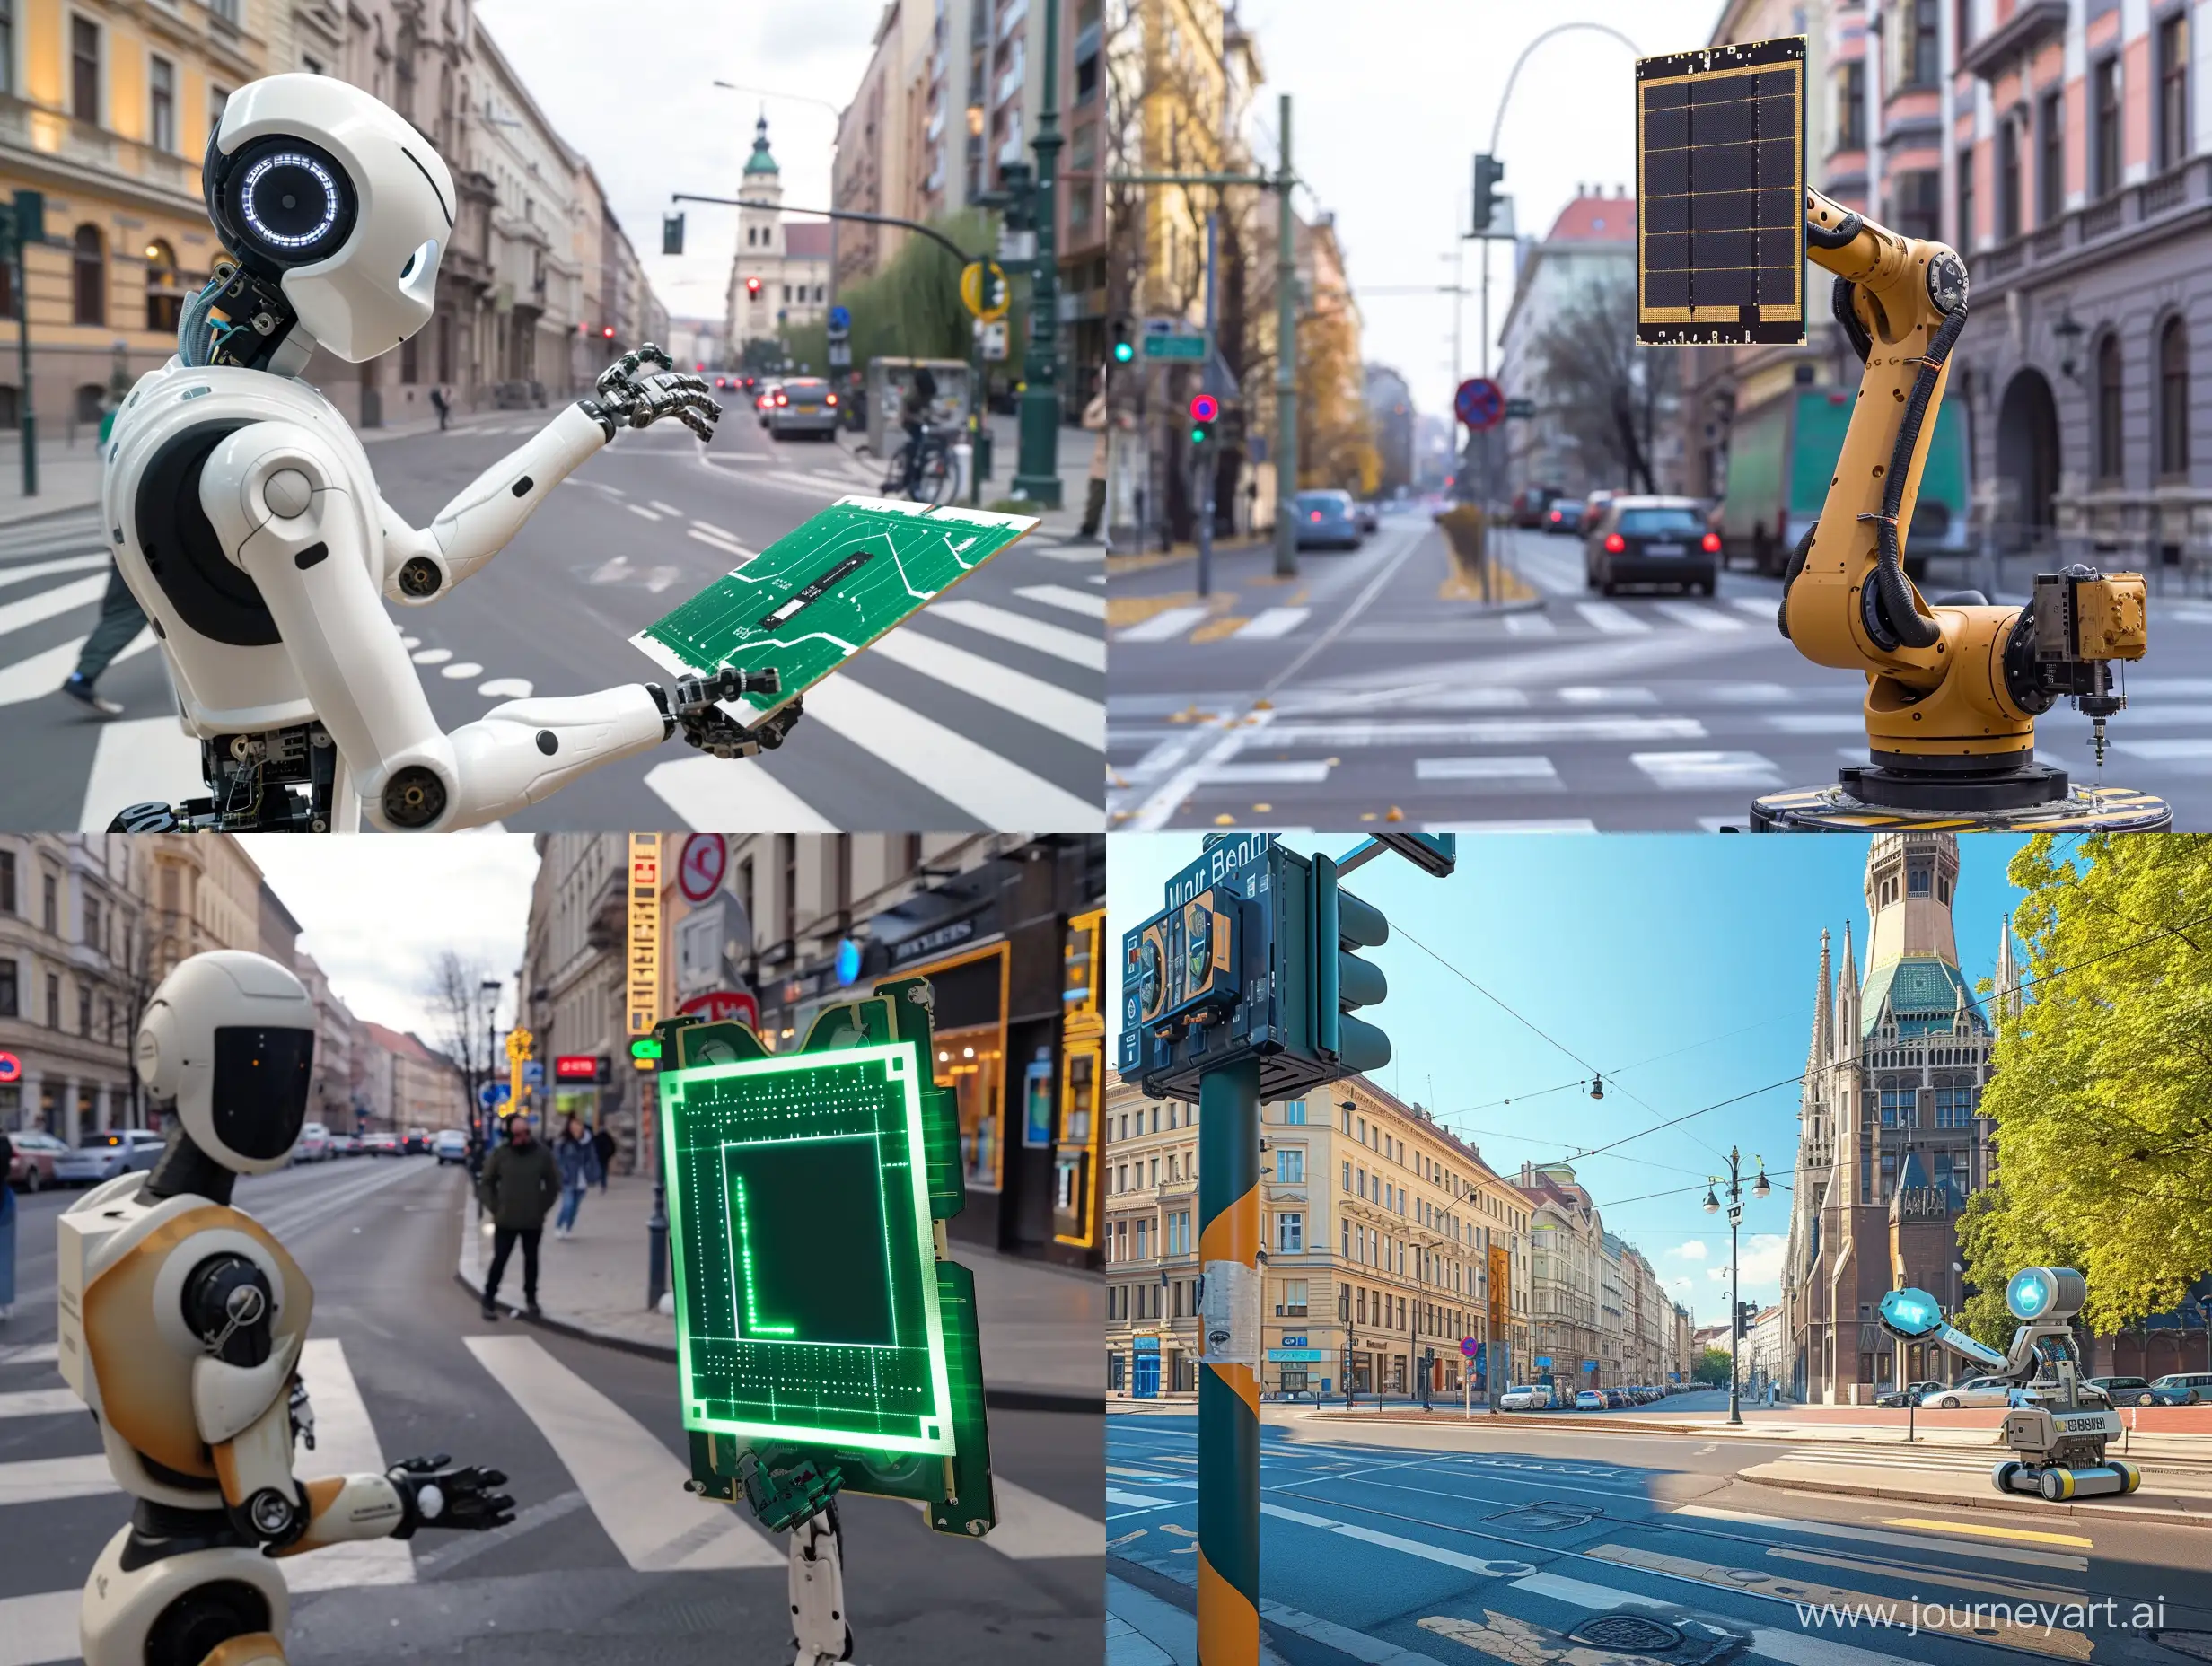 Create an image of an AI-powered system that is integrated into the urban landscape of Budapest, such as a robot inspecting a semiconductor wafer on a street corner or a machine learning system analyzing data from sensors throughout the city.